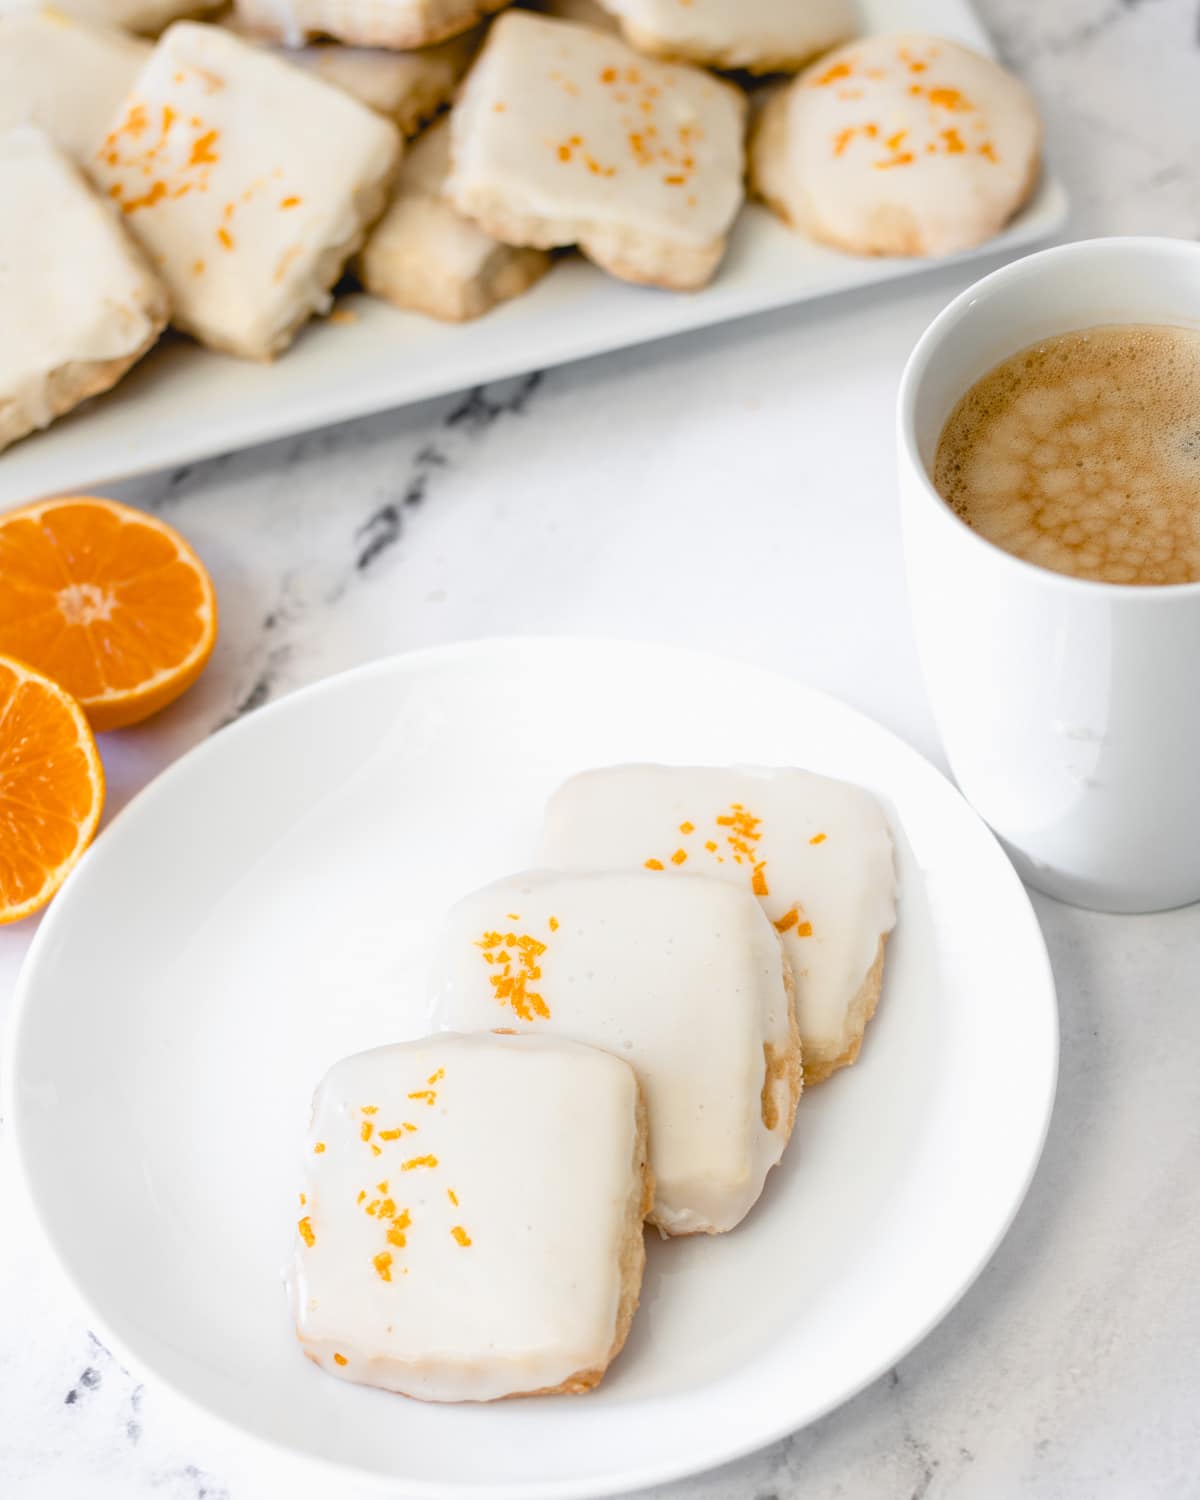 A round plate with 3 cardamom shortbread cookies, a cup of coffee top right, and top left is a plate of cookies and a cut orange.